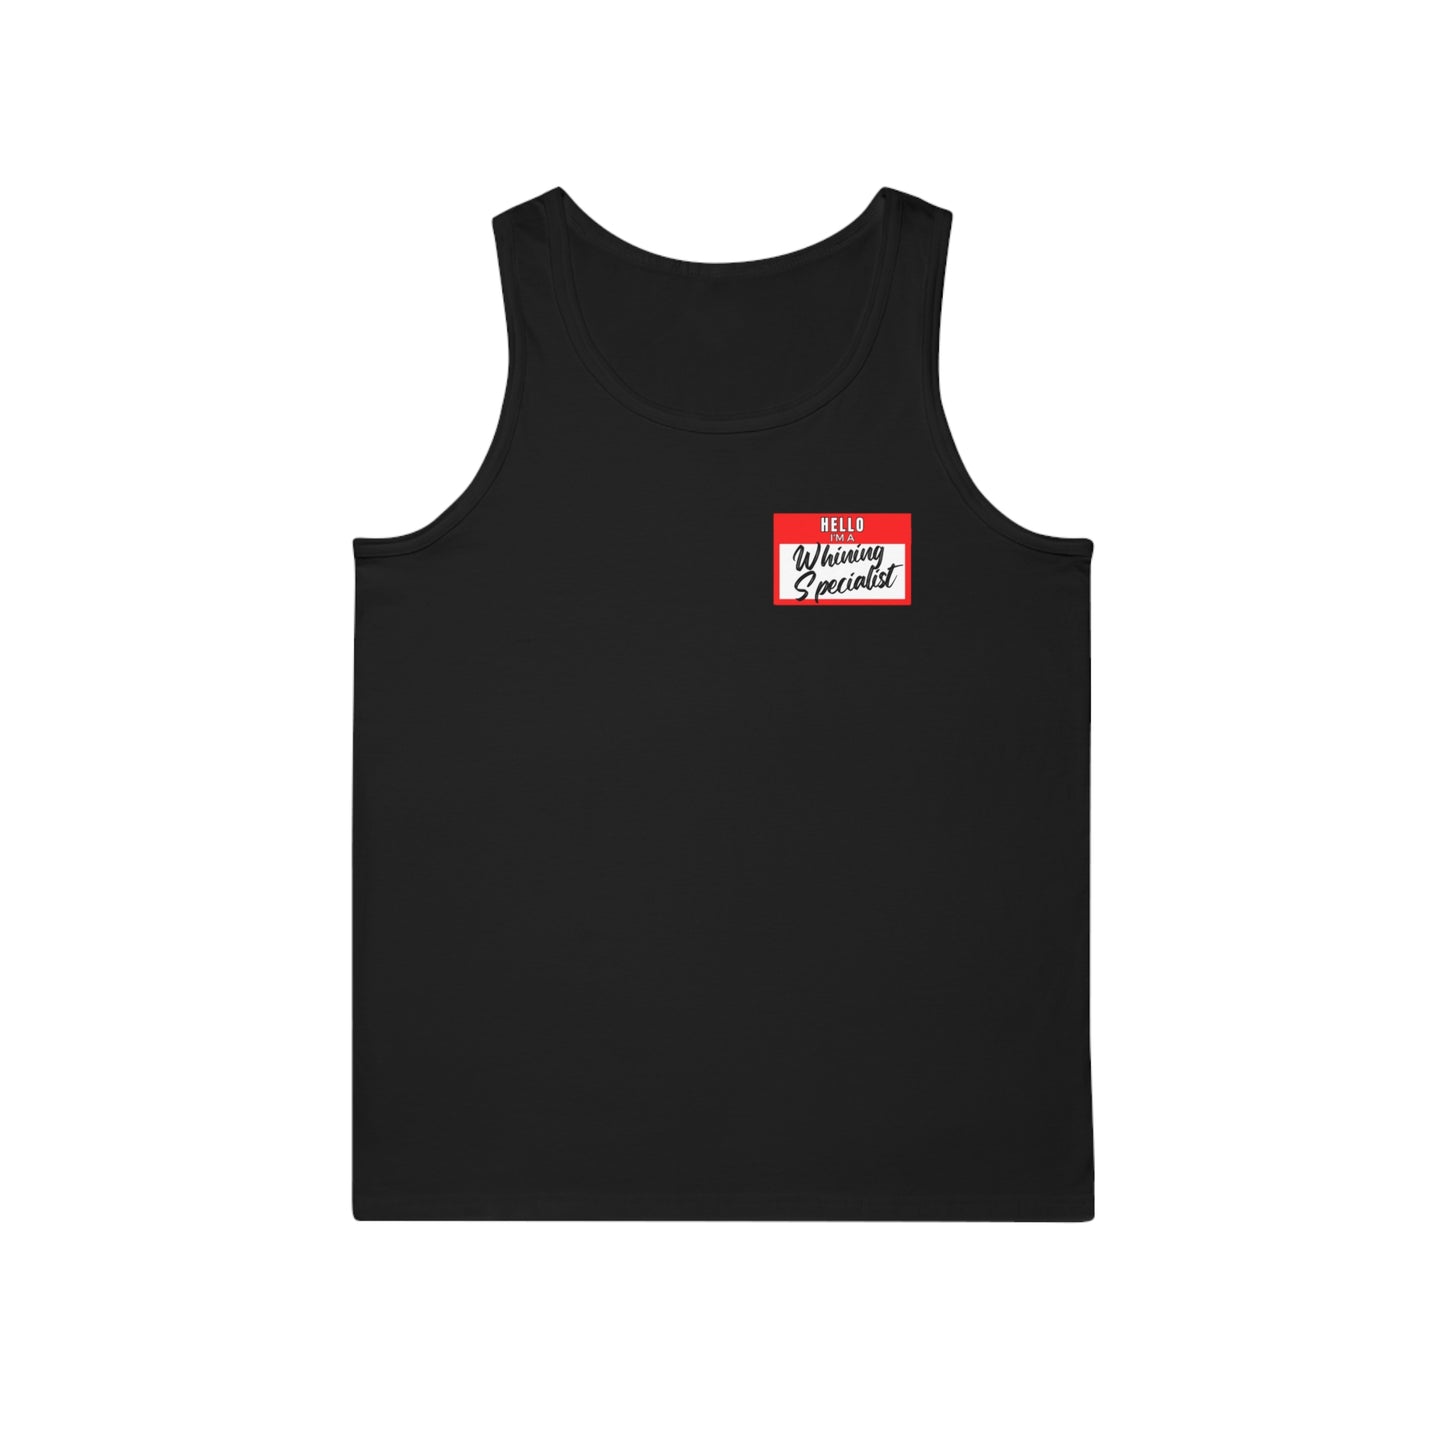 Whining Specialist Unisex Softstyle™ Tank Top